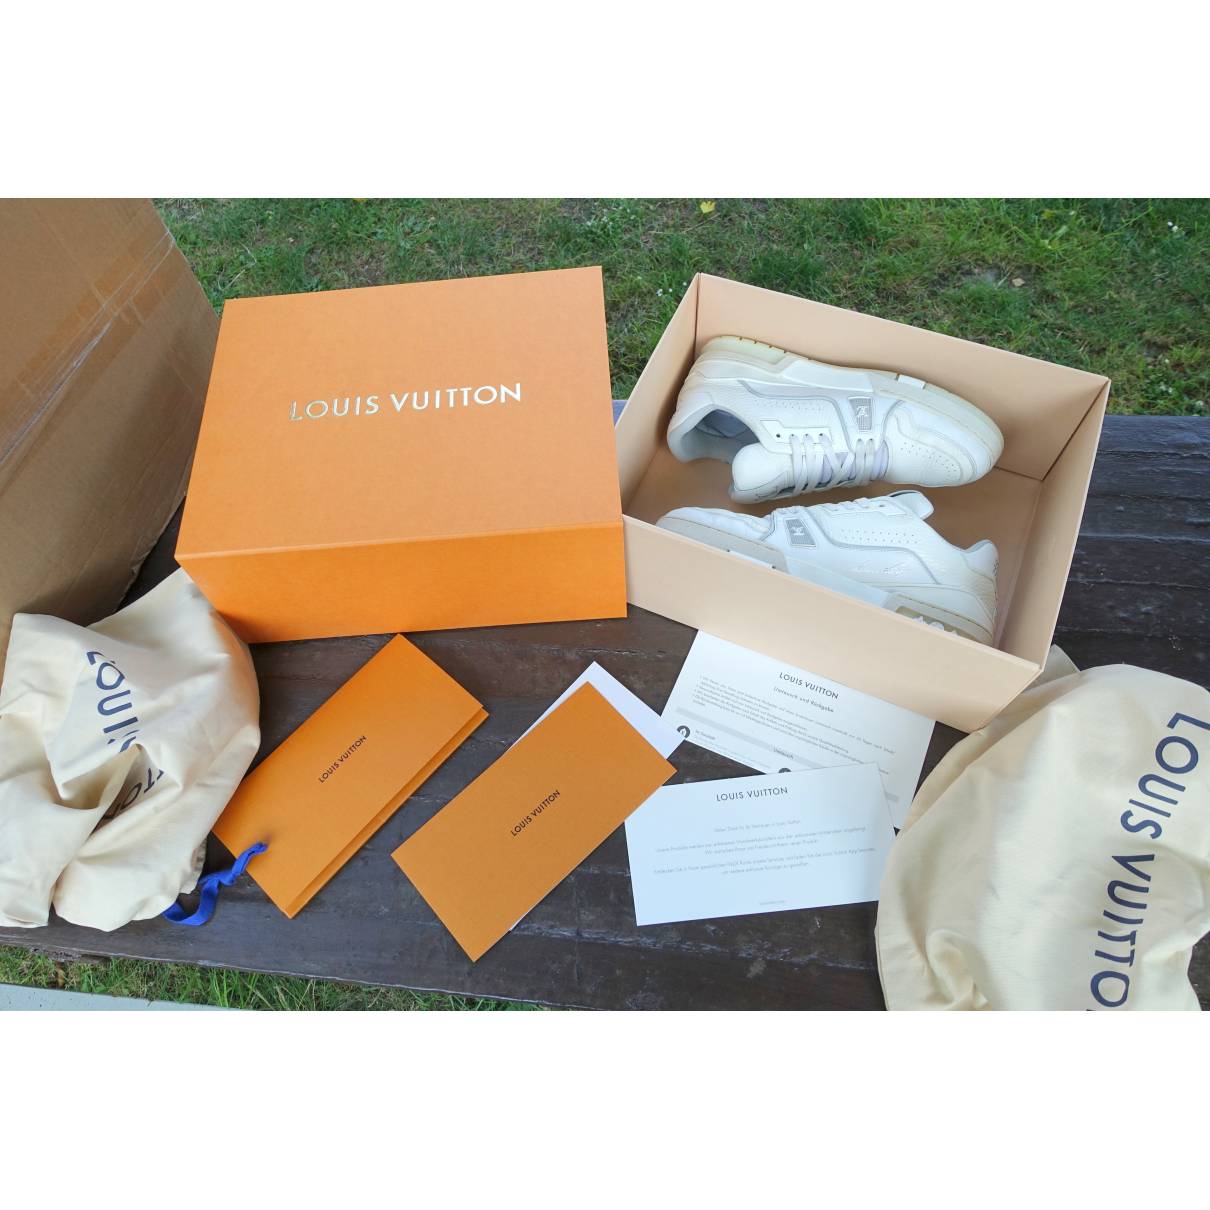 Louis Vuitton - Authenticated LV Trainer Trainer - Leather White Plain for Men, Very Good Condition